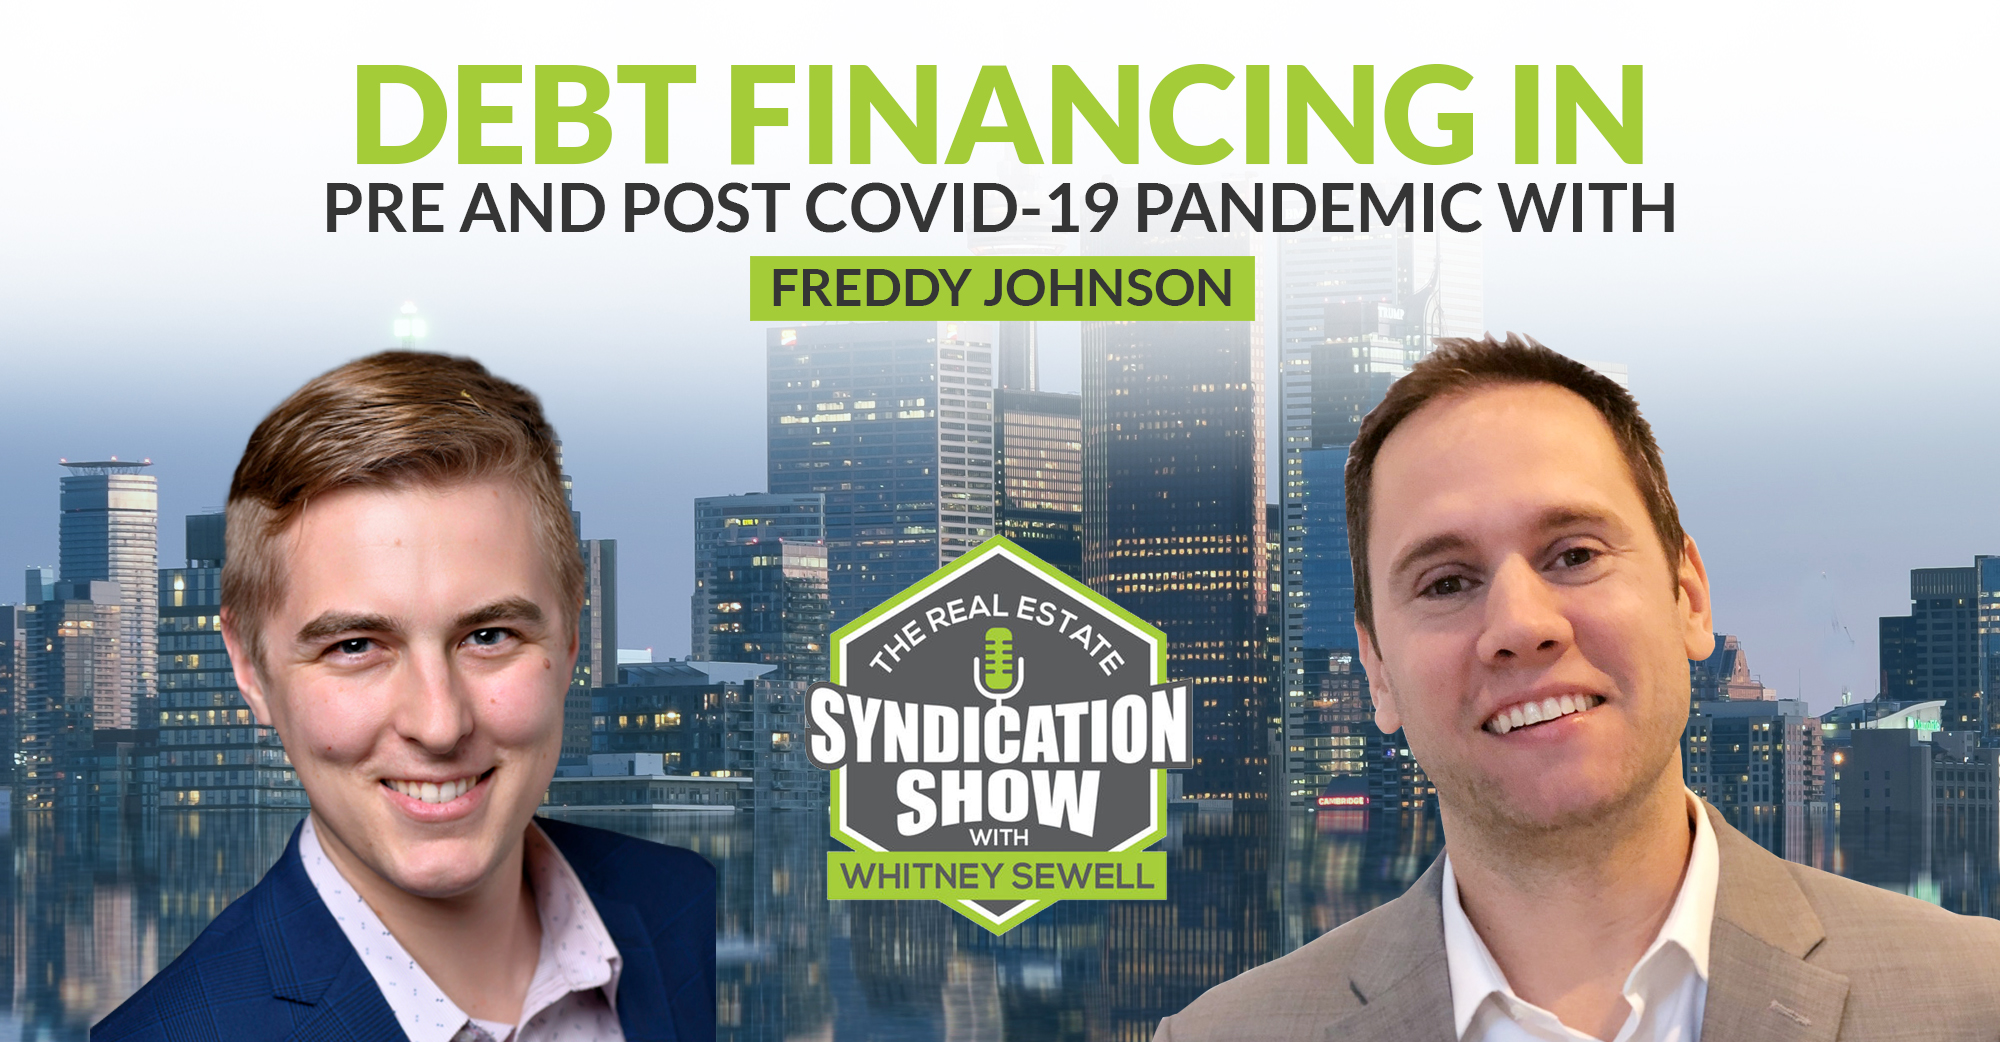 Debt Financing in Pre and Post Covid-19 Pandemic with Freddy Johnson